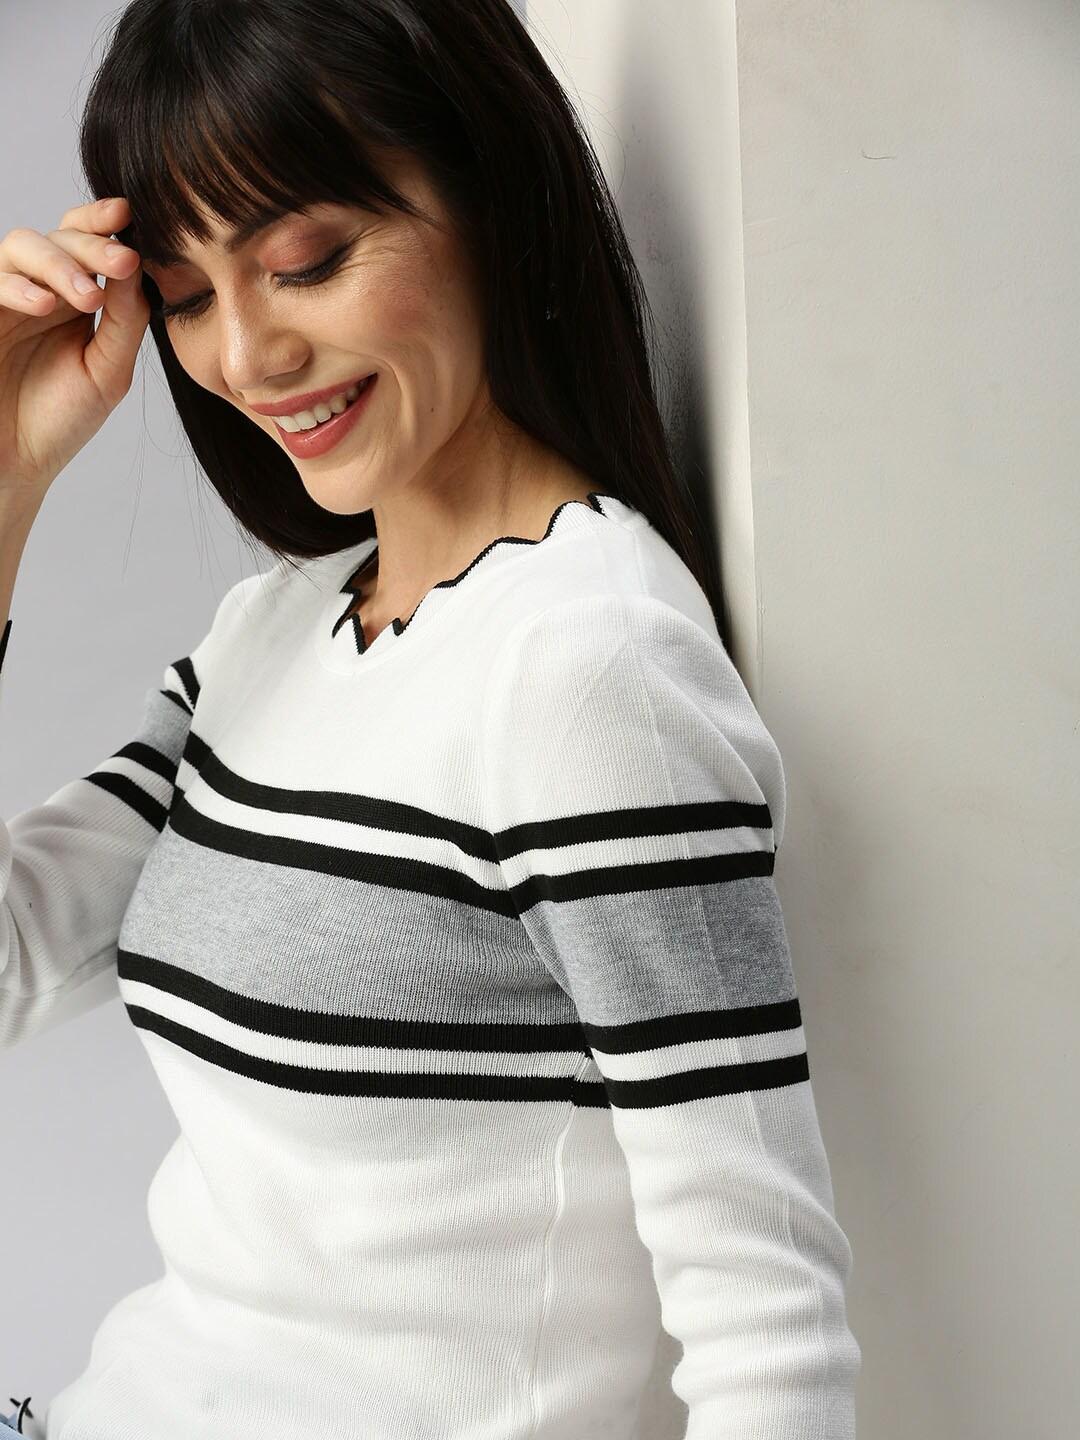 showoff-white-striped-top